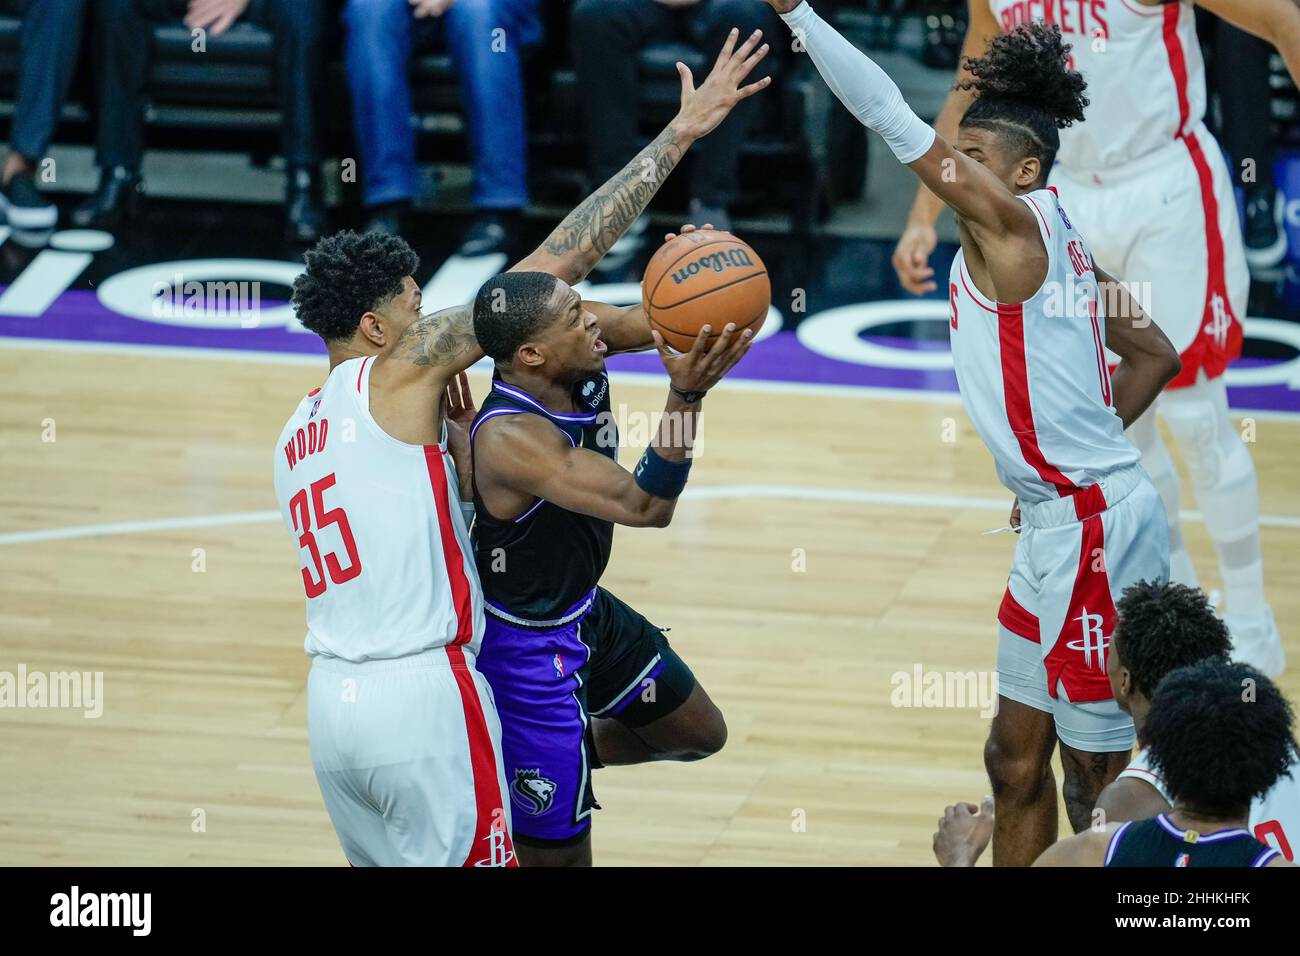 Sacramento Kings guard De'Aaron Fox (5) attempts a shot while being defended by Houston Rockets forward Christian Wood (35) at the NBA game between th Stock Photo